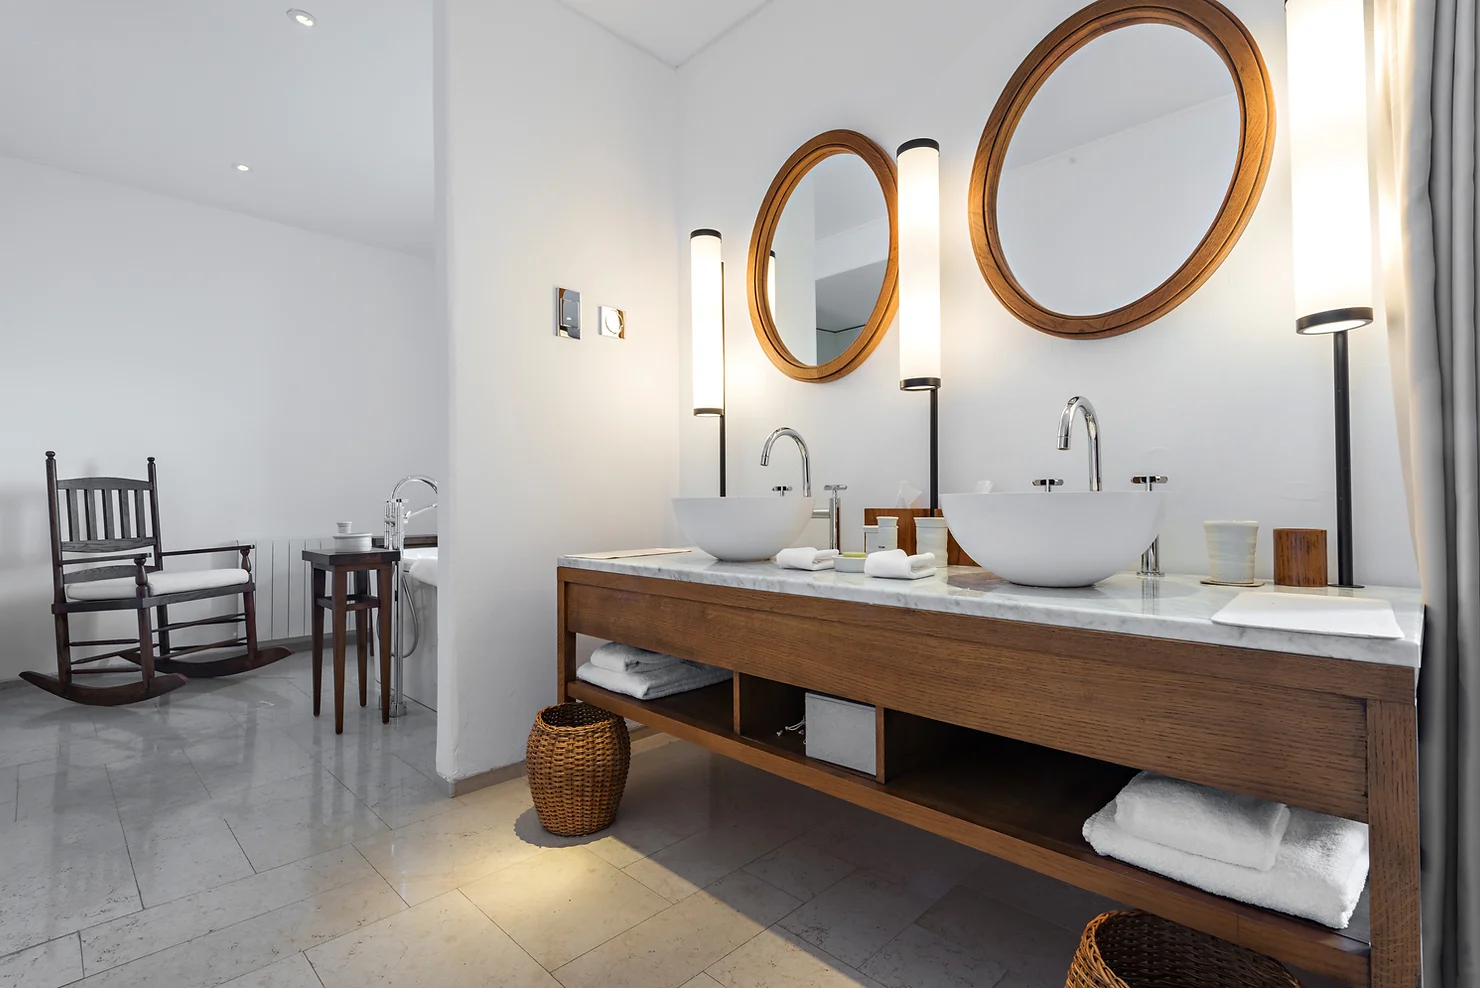 A modern bathroom features twin round mirrors, two vessel sinks, long pendant lights, and a wooden vanity with towels beneath. A rocking chair nearby.